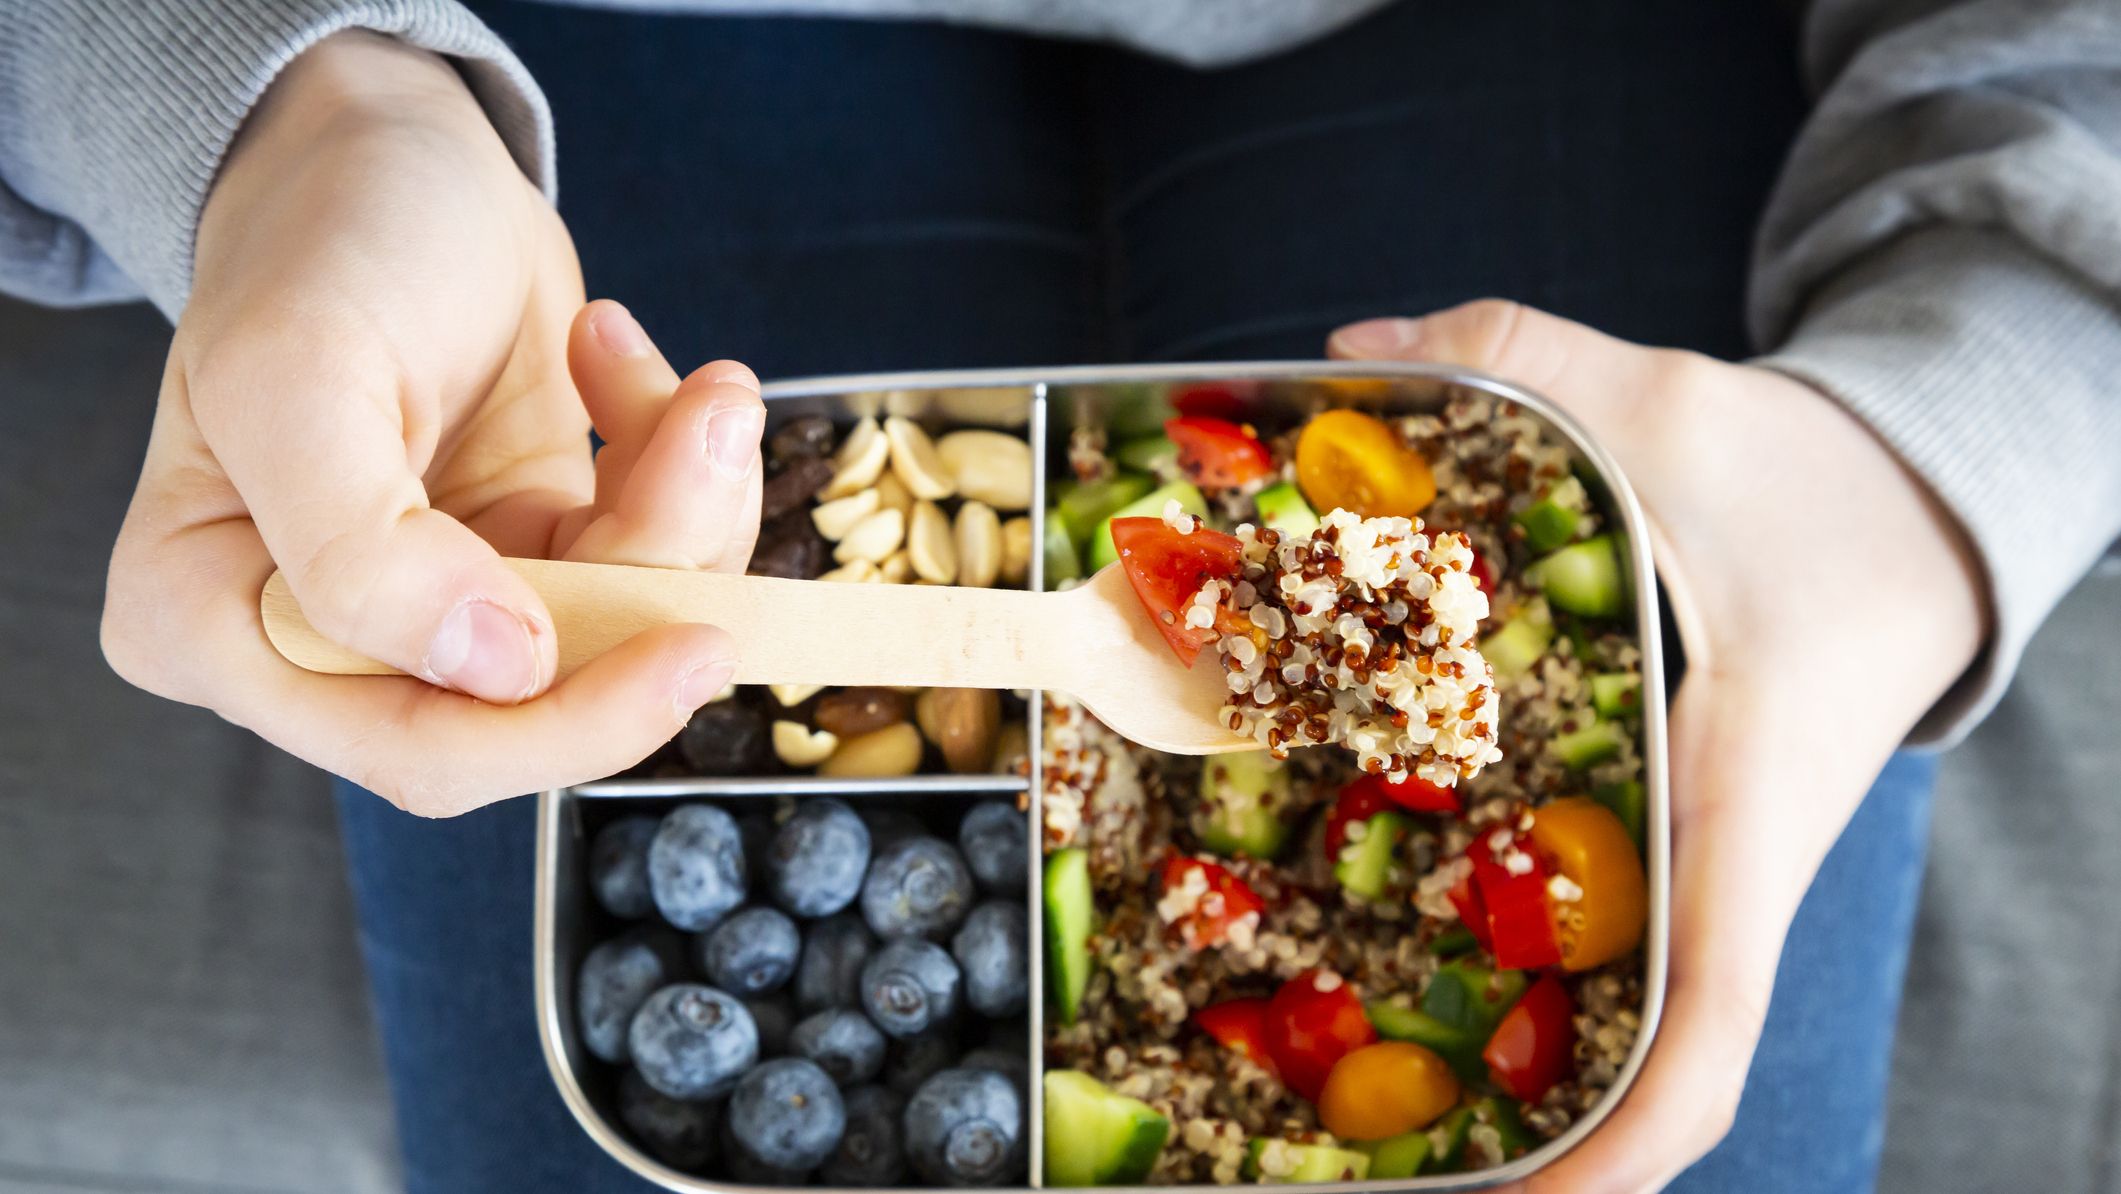 https://hips.hearstapps.com/hmg-prod/images/lunchbox-with-quinoa-salad-with-tomato-and-cucumber-royalty-free-image-1681315894.jpg?crop=1xw:0.84415xh;center,top